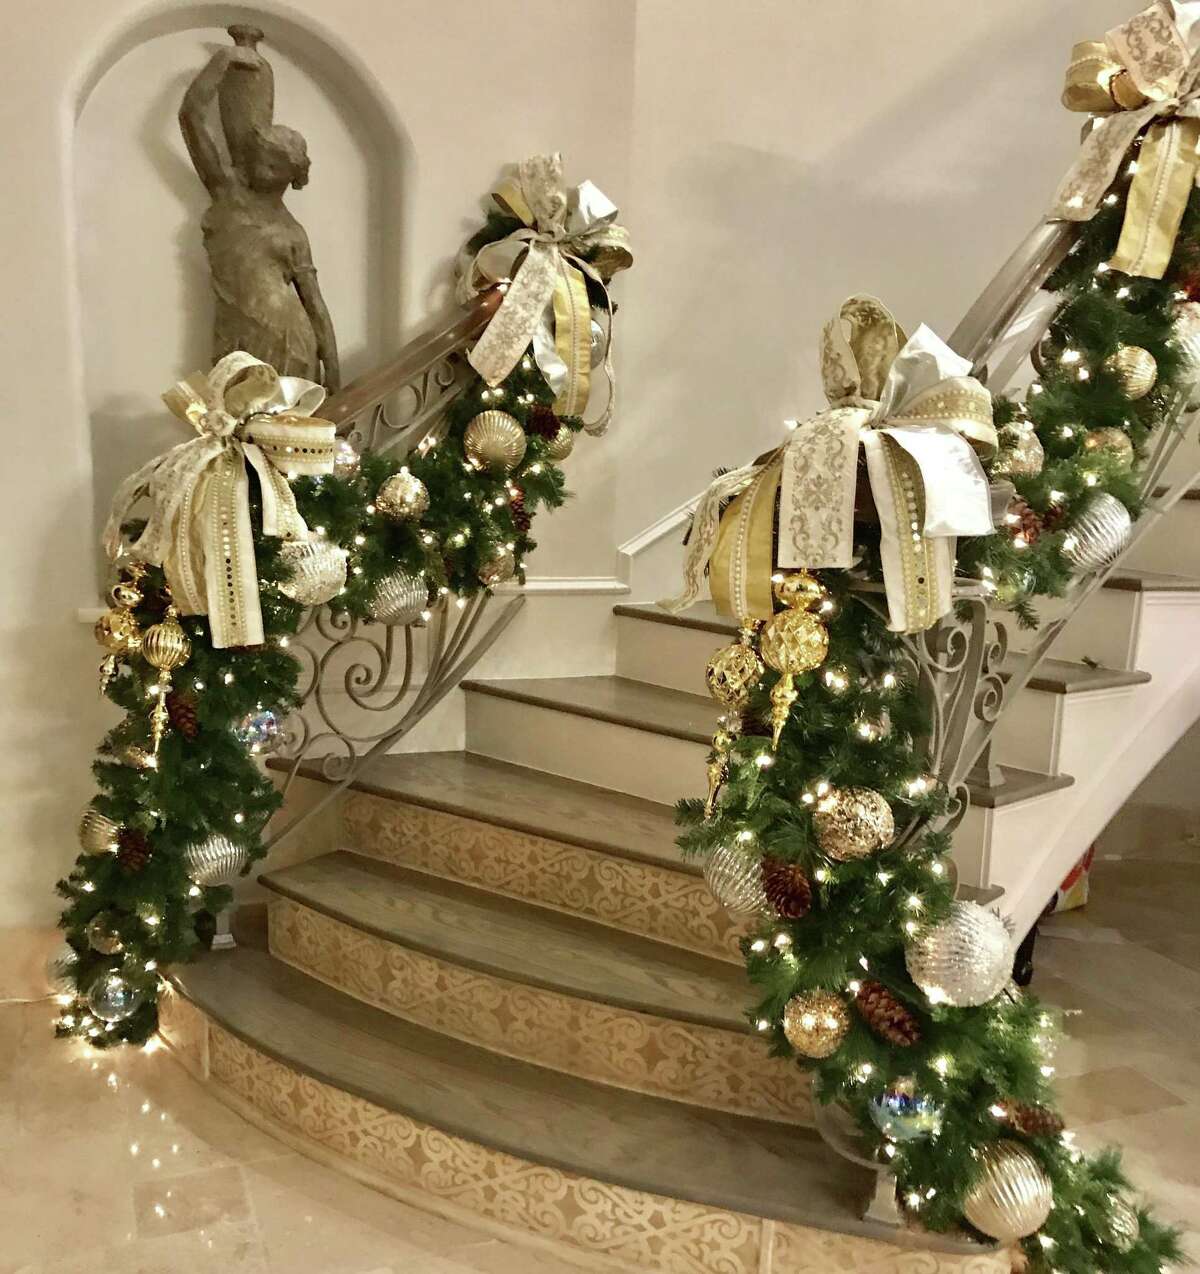 This stair rail is decorated with heavy swags of garland filled with lights, ornaments and big metallic ribbon.